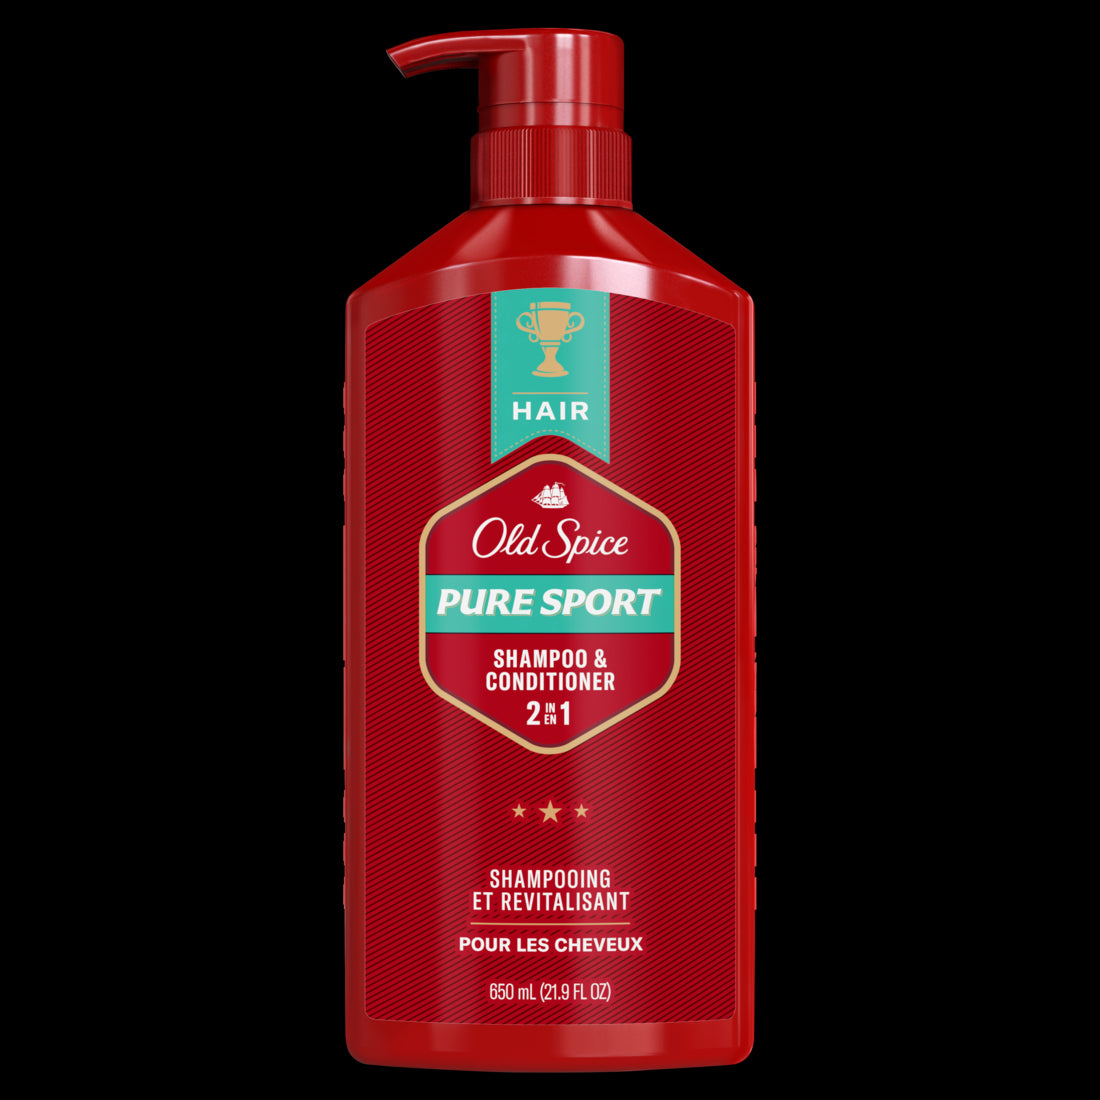 Old Spice Pure Sport 2in1 Shampoo and Conditioner for Men 22oz/4pk